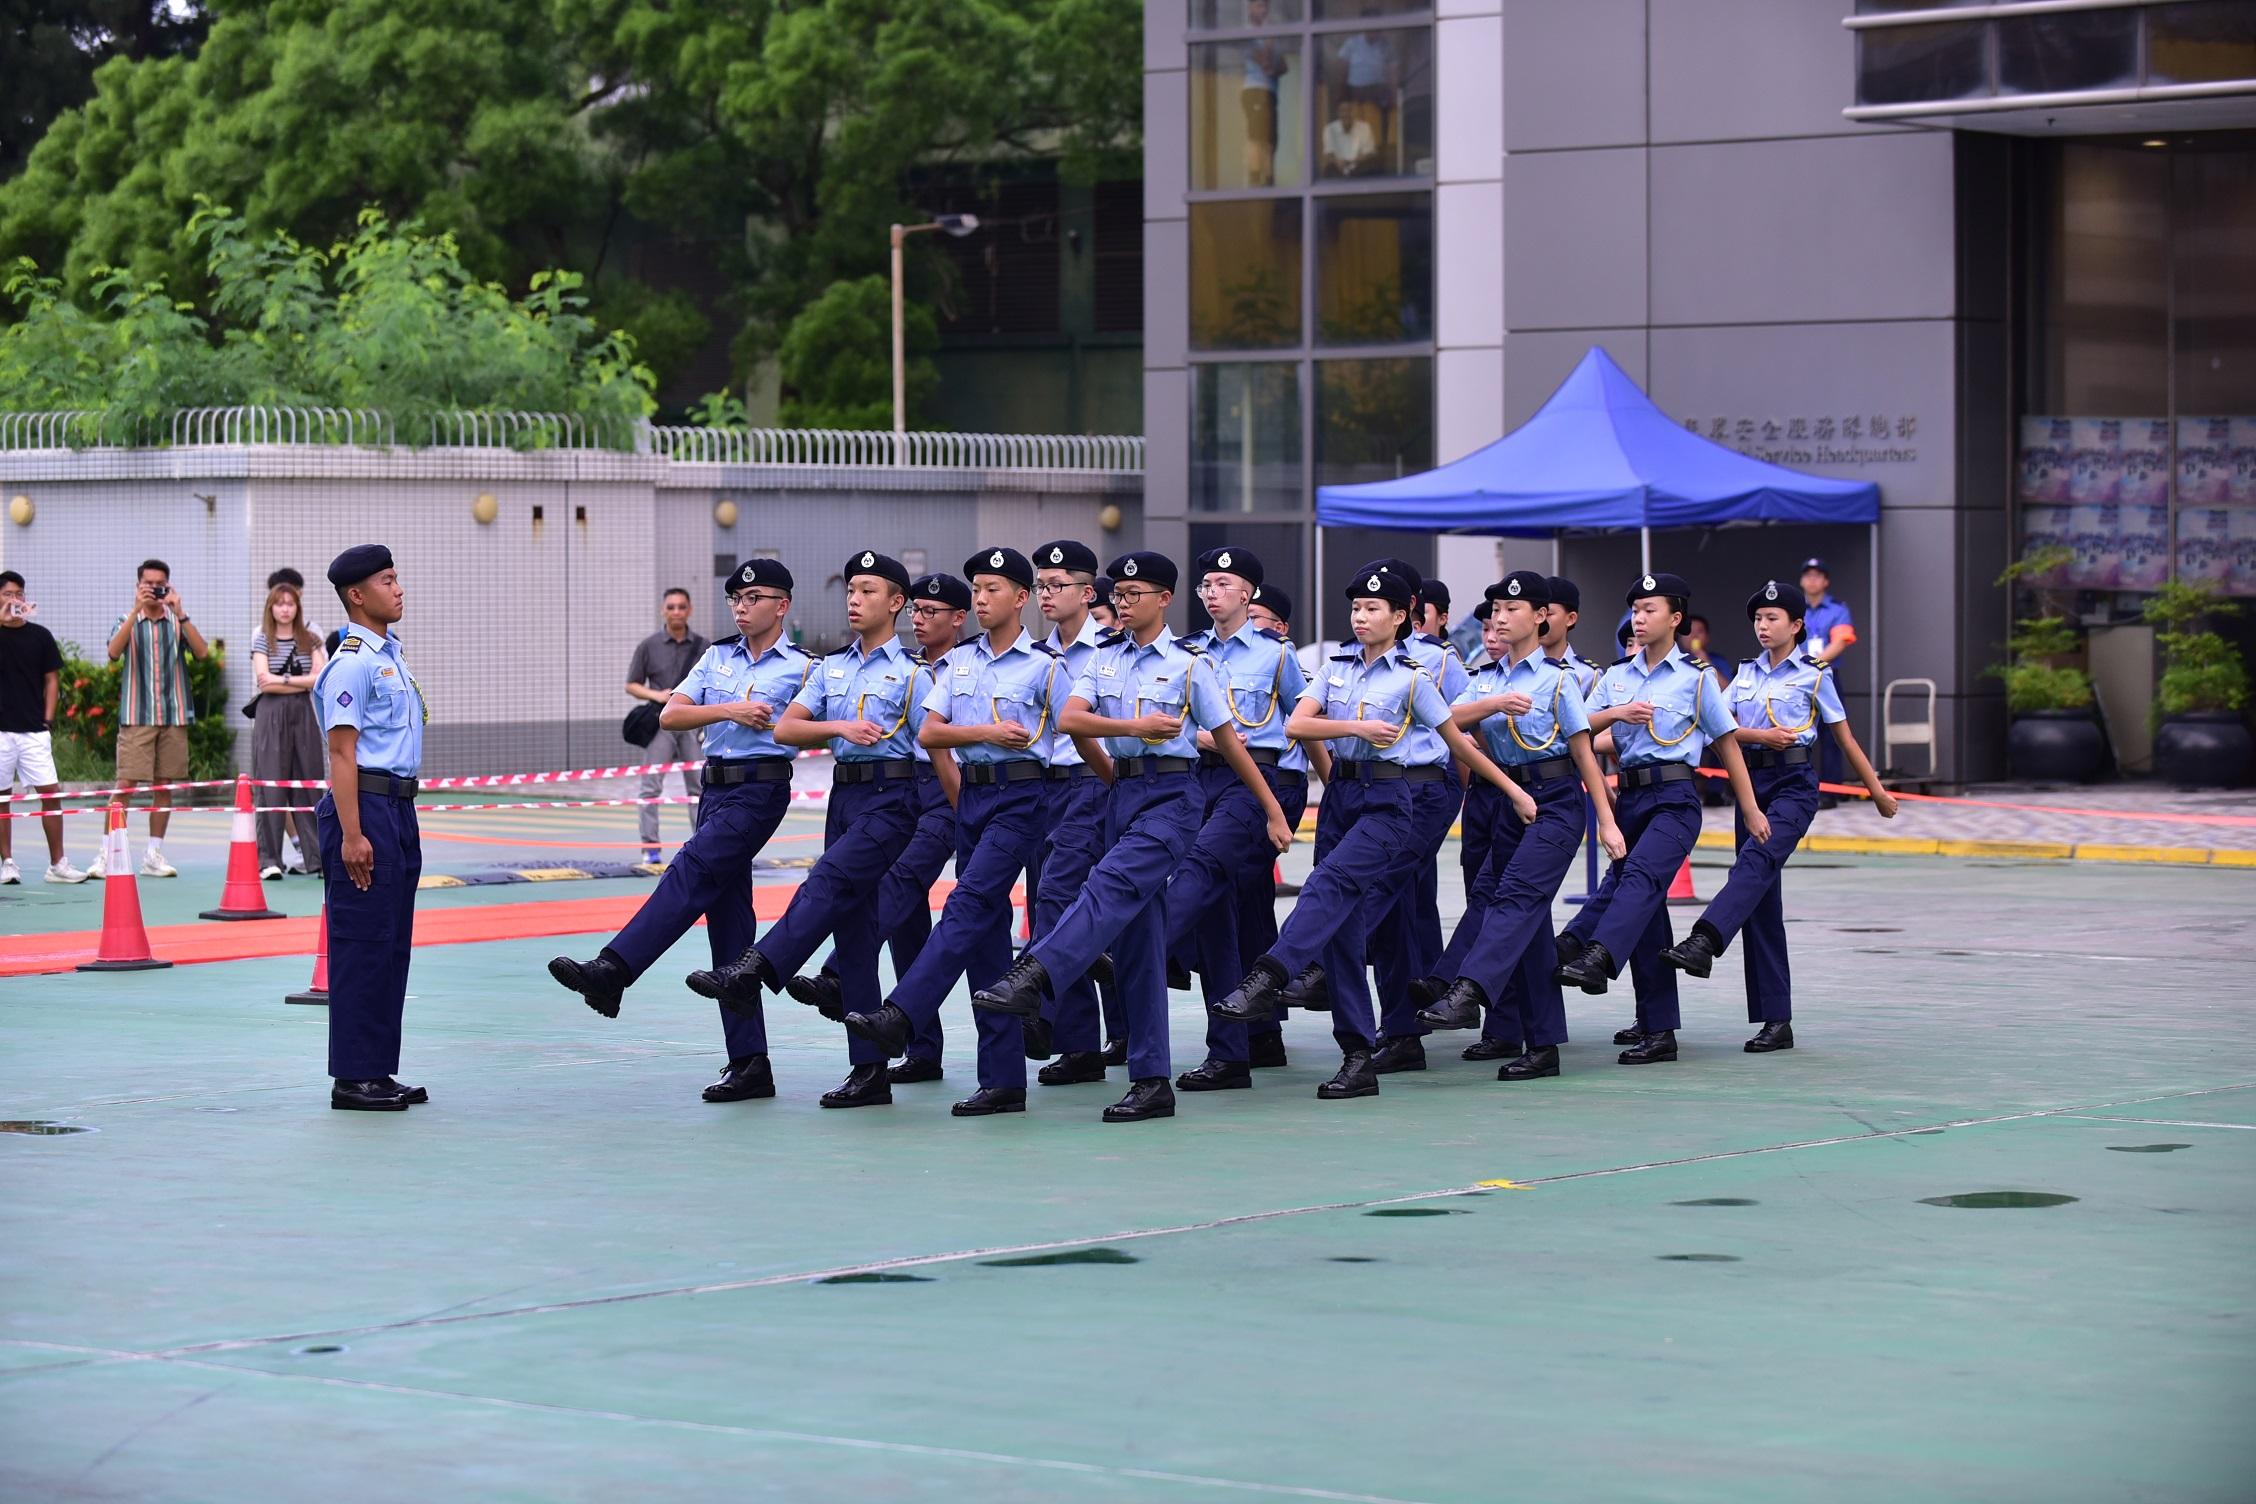 The Civil Aid Service Cadet Corps Foot Drill Competition 2023 was held today (August 27). Photo shows a participating team performing a foot drill with synchronised movements.